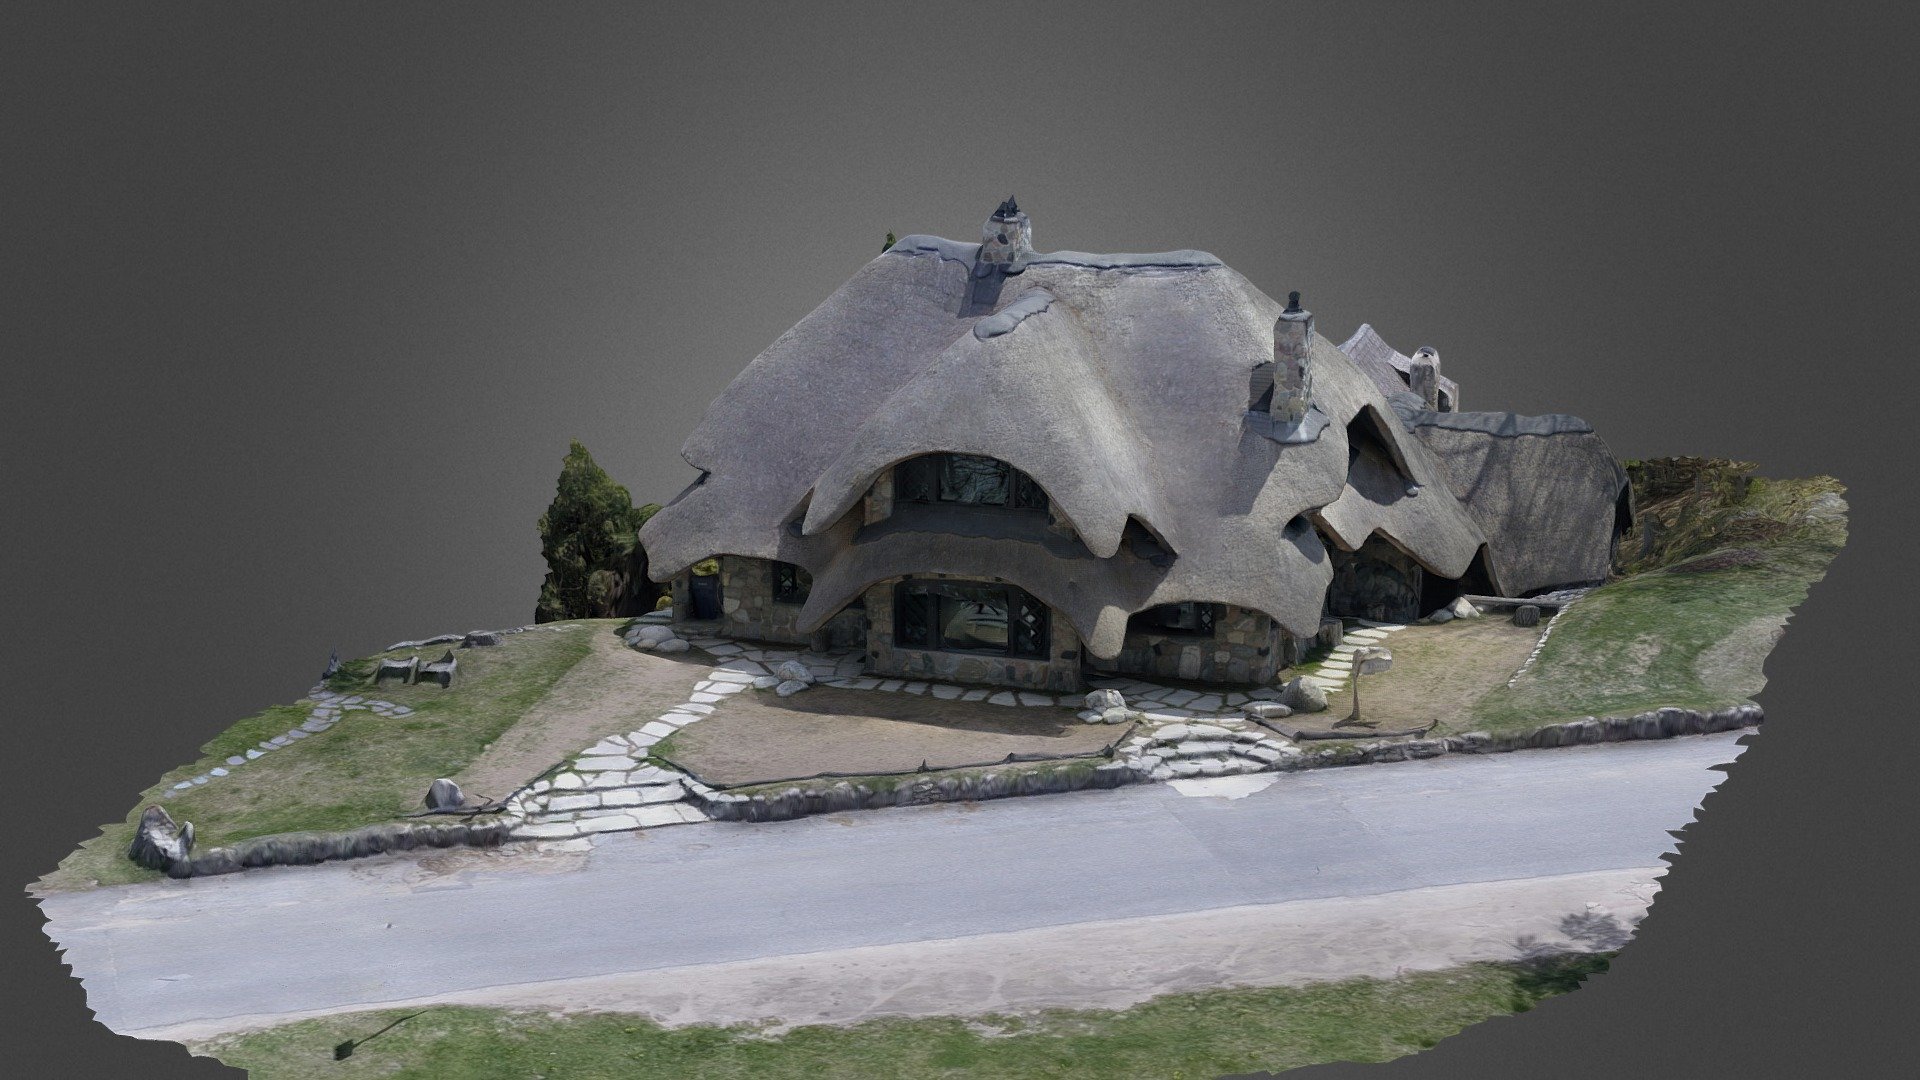 Mushroom house in Charlevoix, MI
Thatch House
Imaged with a drone - Thatch House - 3D model by Emmet Drones (@kdamerow) 3d model